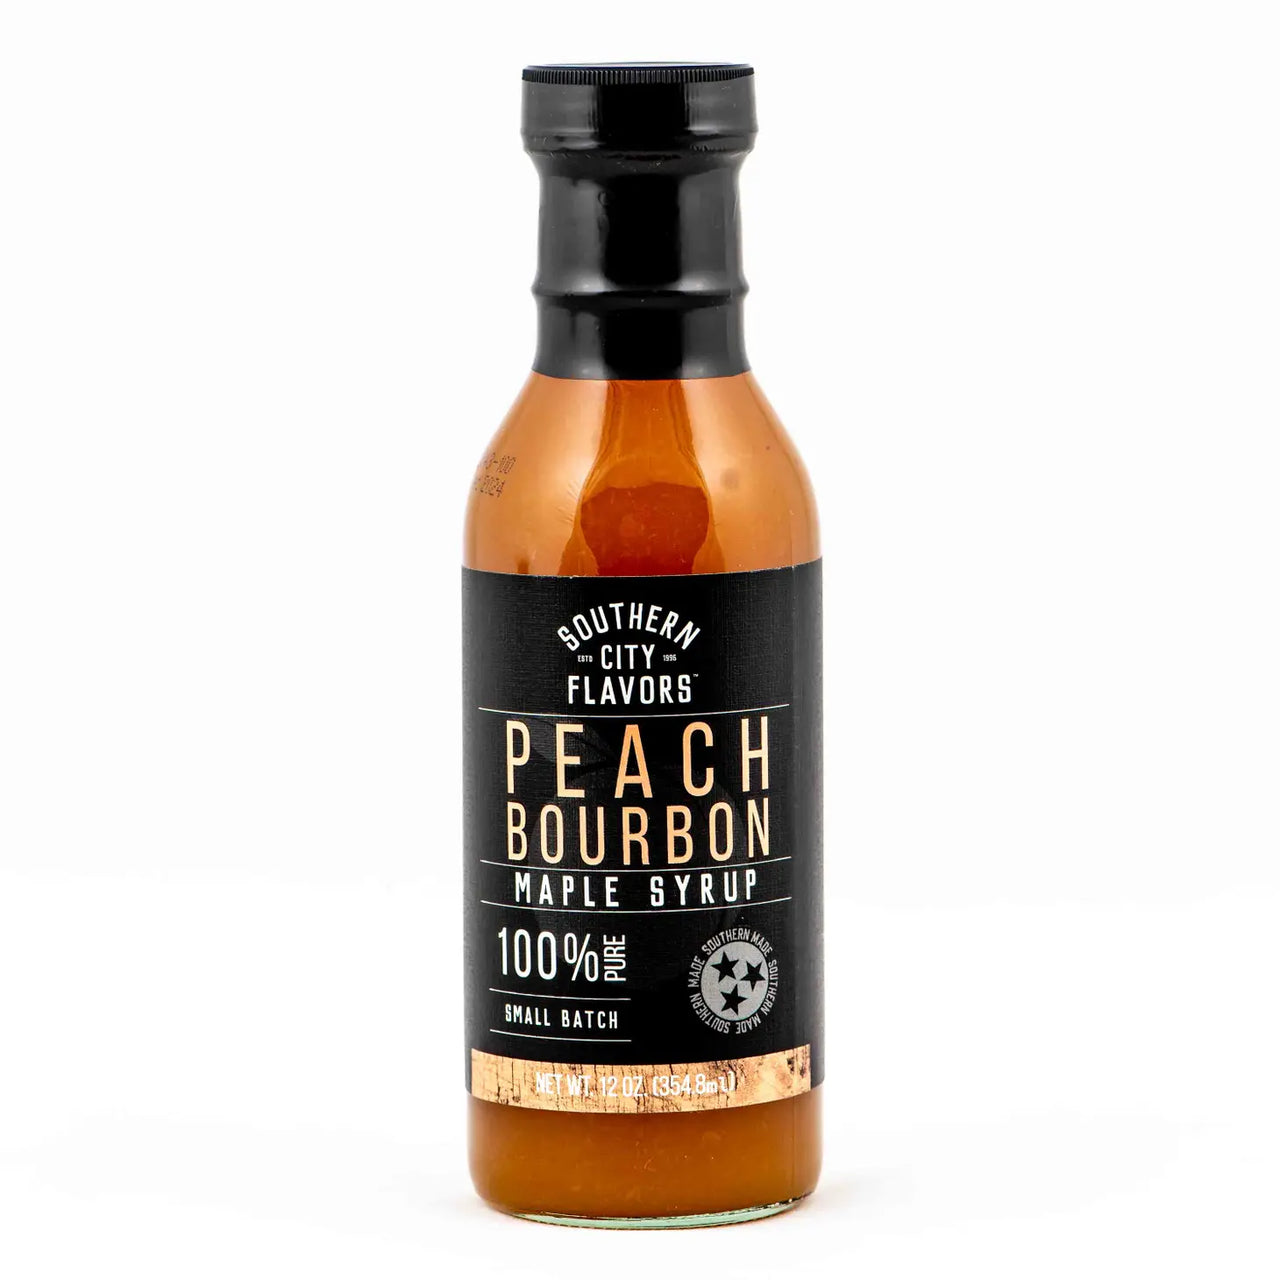 Southern City Flavors Peach Bourbon Maple Syrup